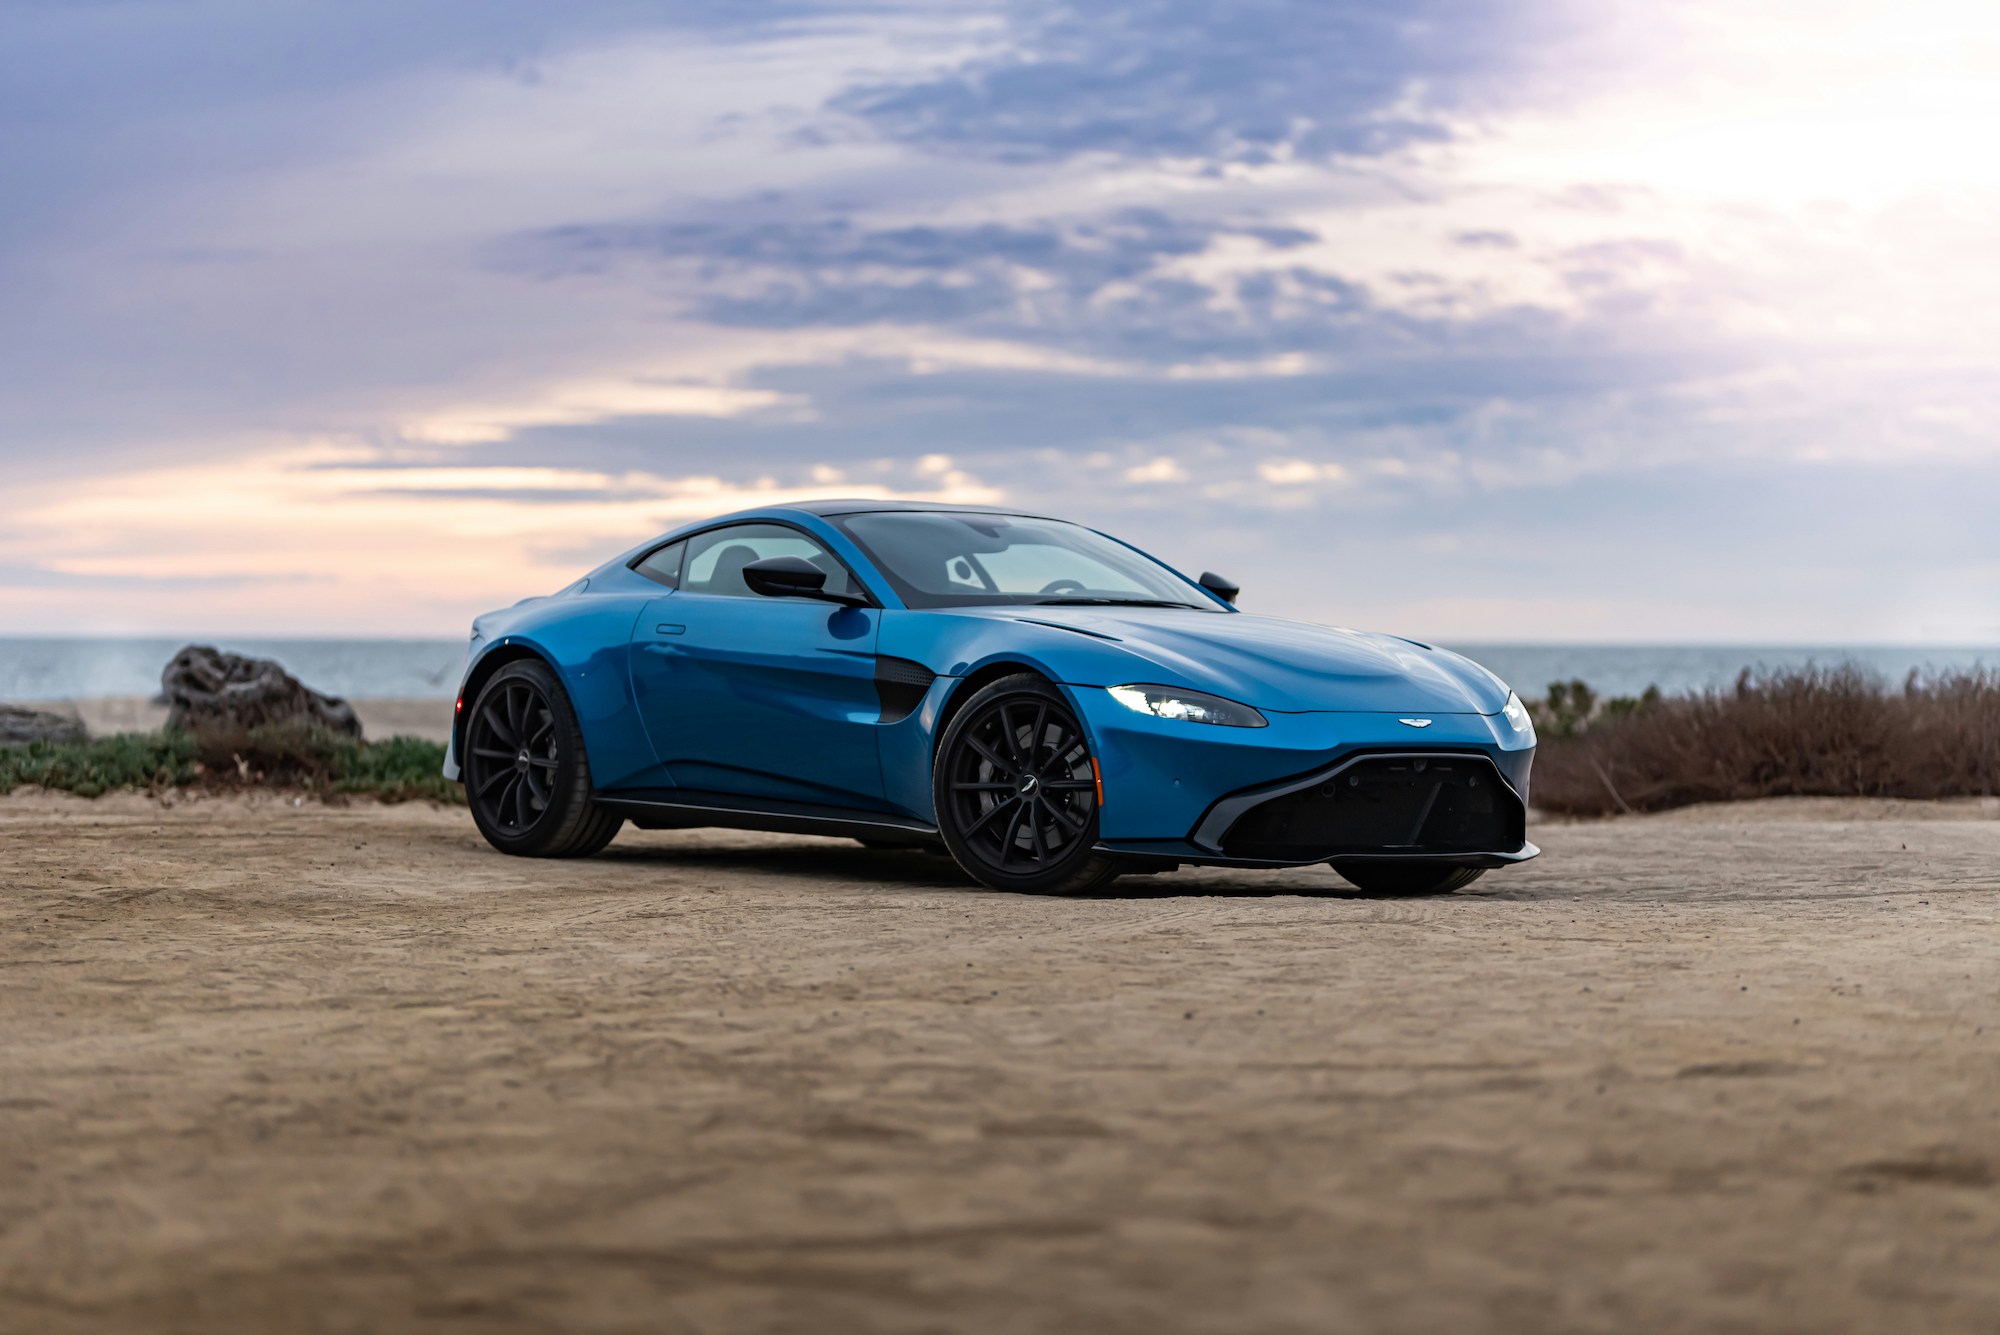 Investing Fox | Aston Martin in a slump: the company's shares lost 22 % in a month